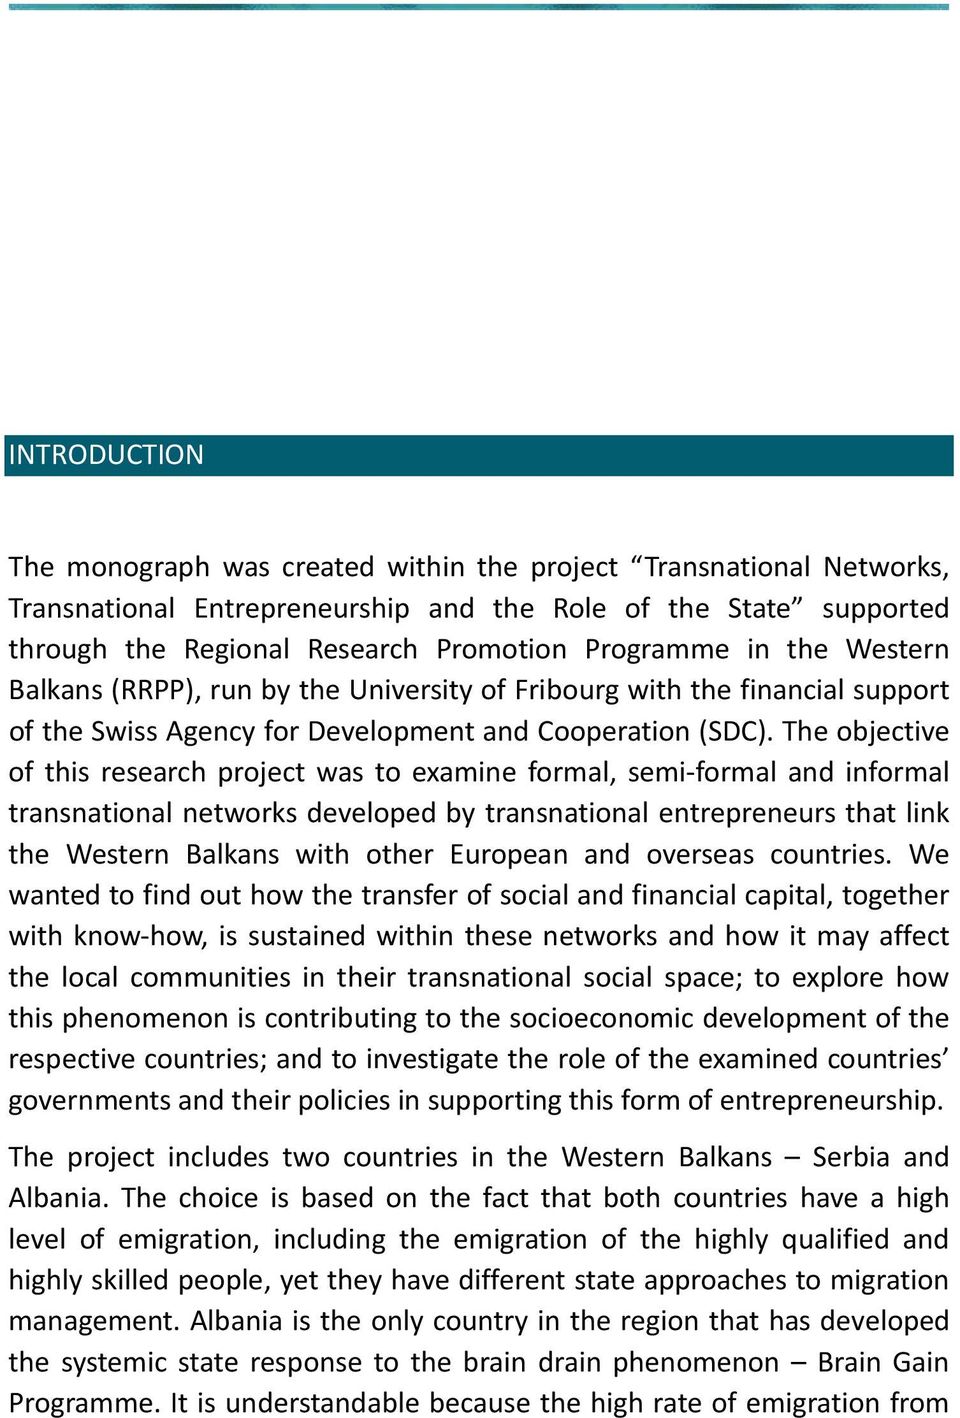 The objective of this research project was to examine formal, semi formal and informal transnational networks developed by transnational entrepreneurs that link the Western Balkans with other